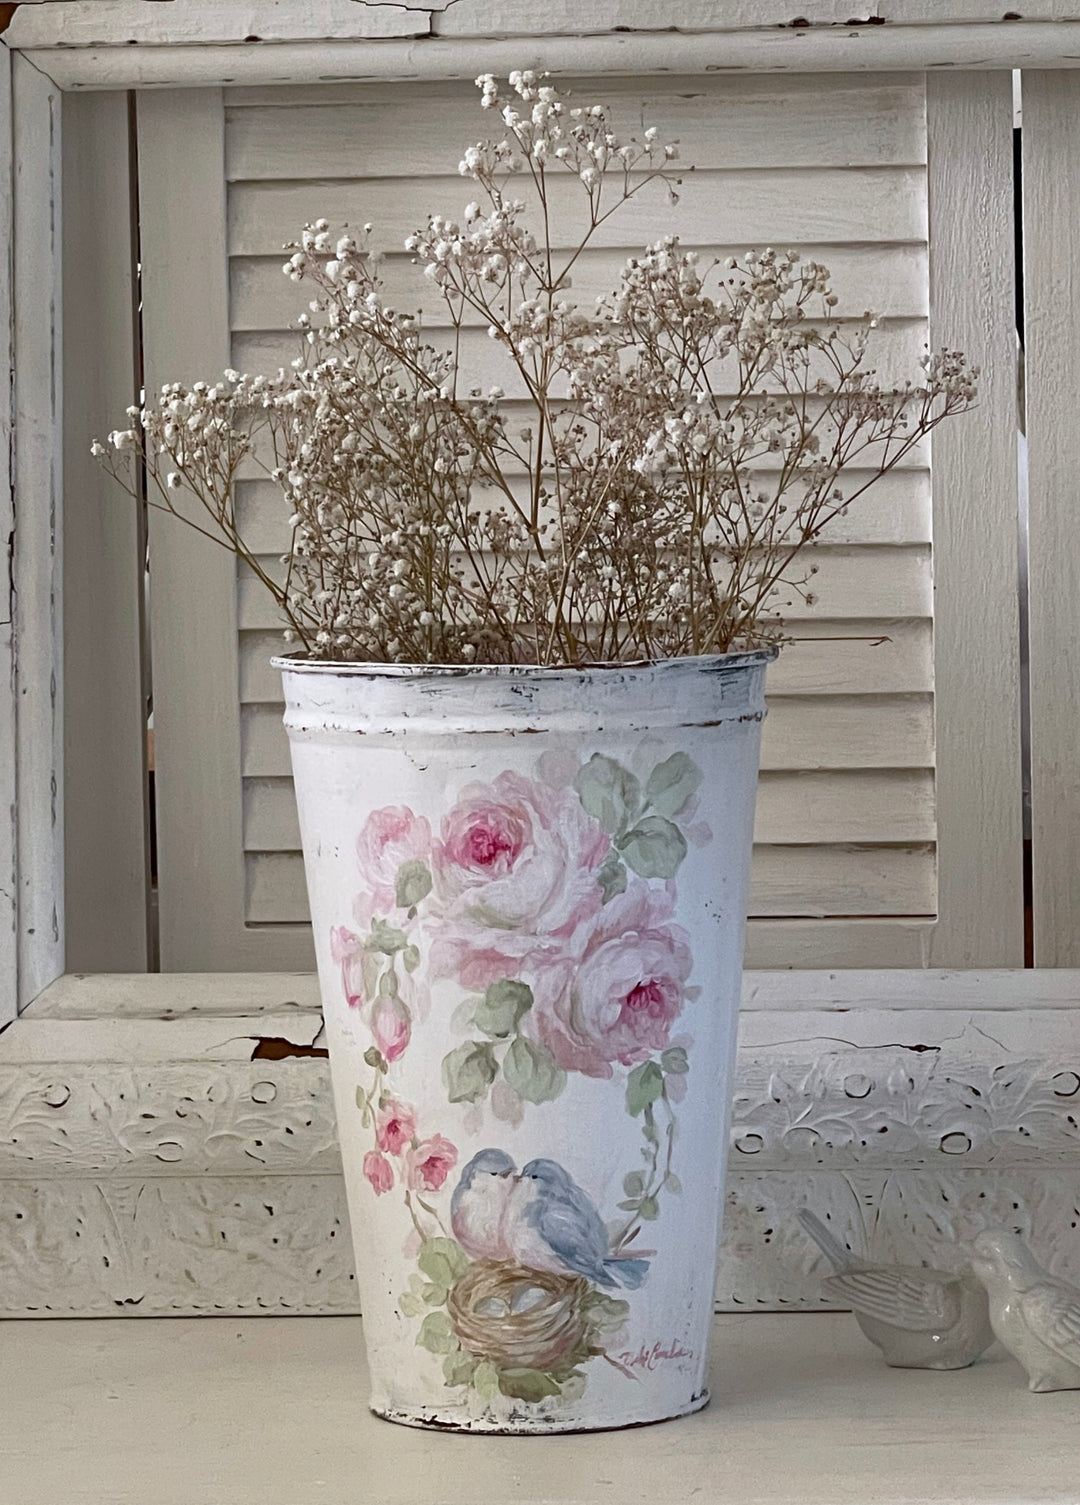 Shabby Chic Antique Floral Bucket With Bluebirds Nest and Roses Pink Roses Original by Debi Coules